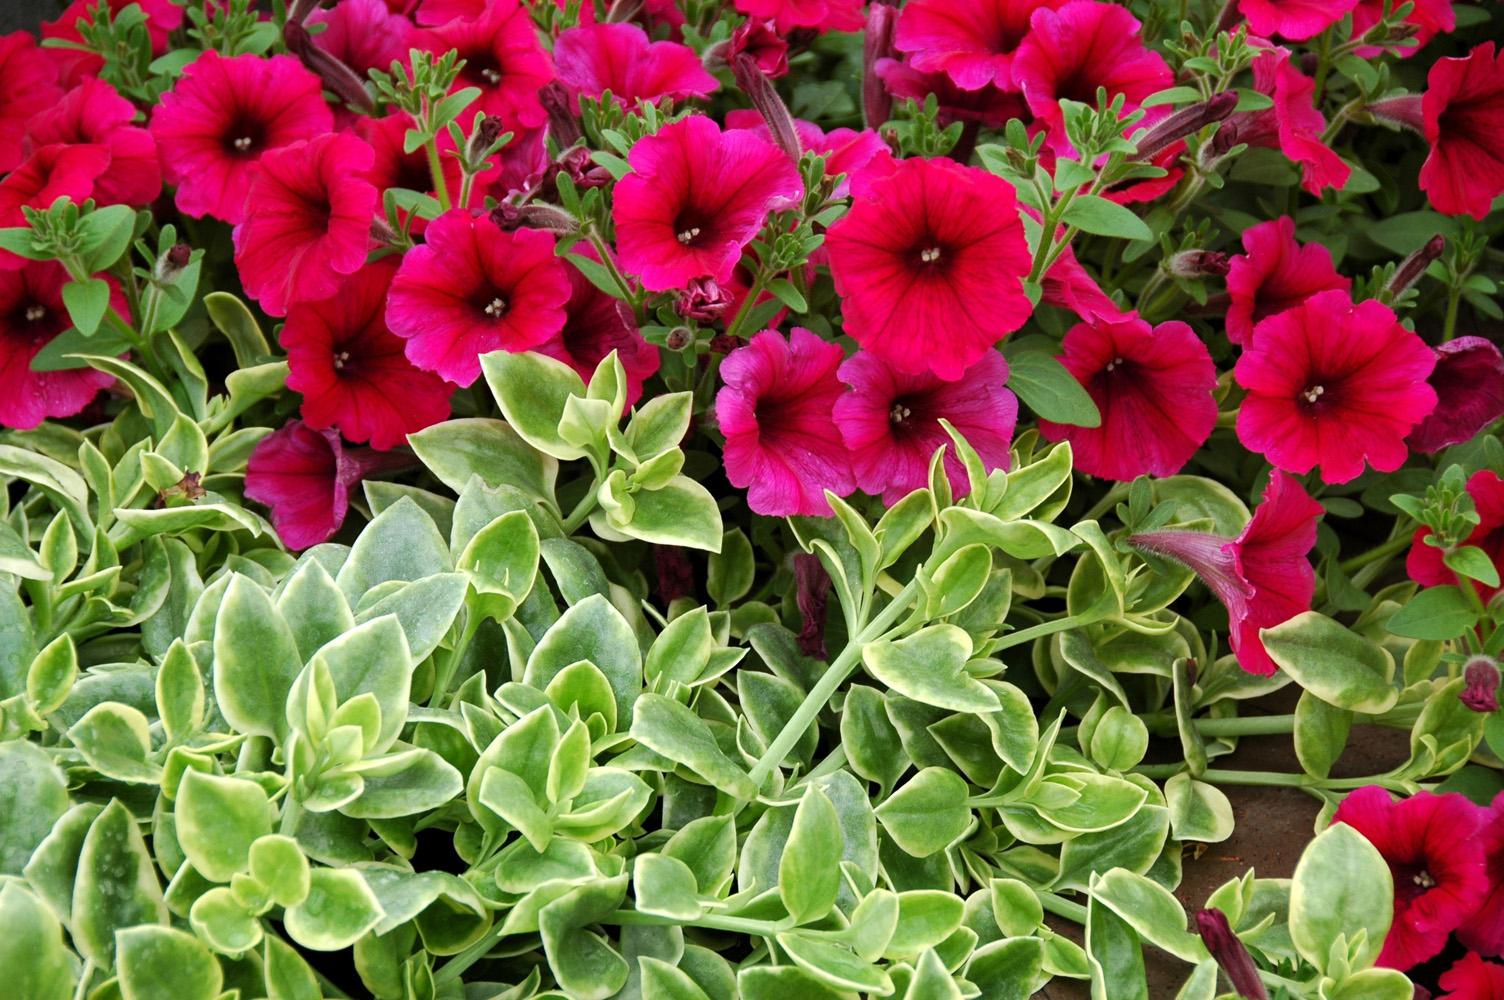 Mezoo Trailing Red succulent has glossy green foliage with cream margins. In this setting, it supports a planting of Sanguna Electric Burgandy petunias. Mezoo Trailing Red can be used as a groundcover or as a spiller plant in mixed containers. The red in its name comes from dime-sized flowers that accent the plant.